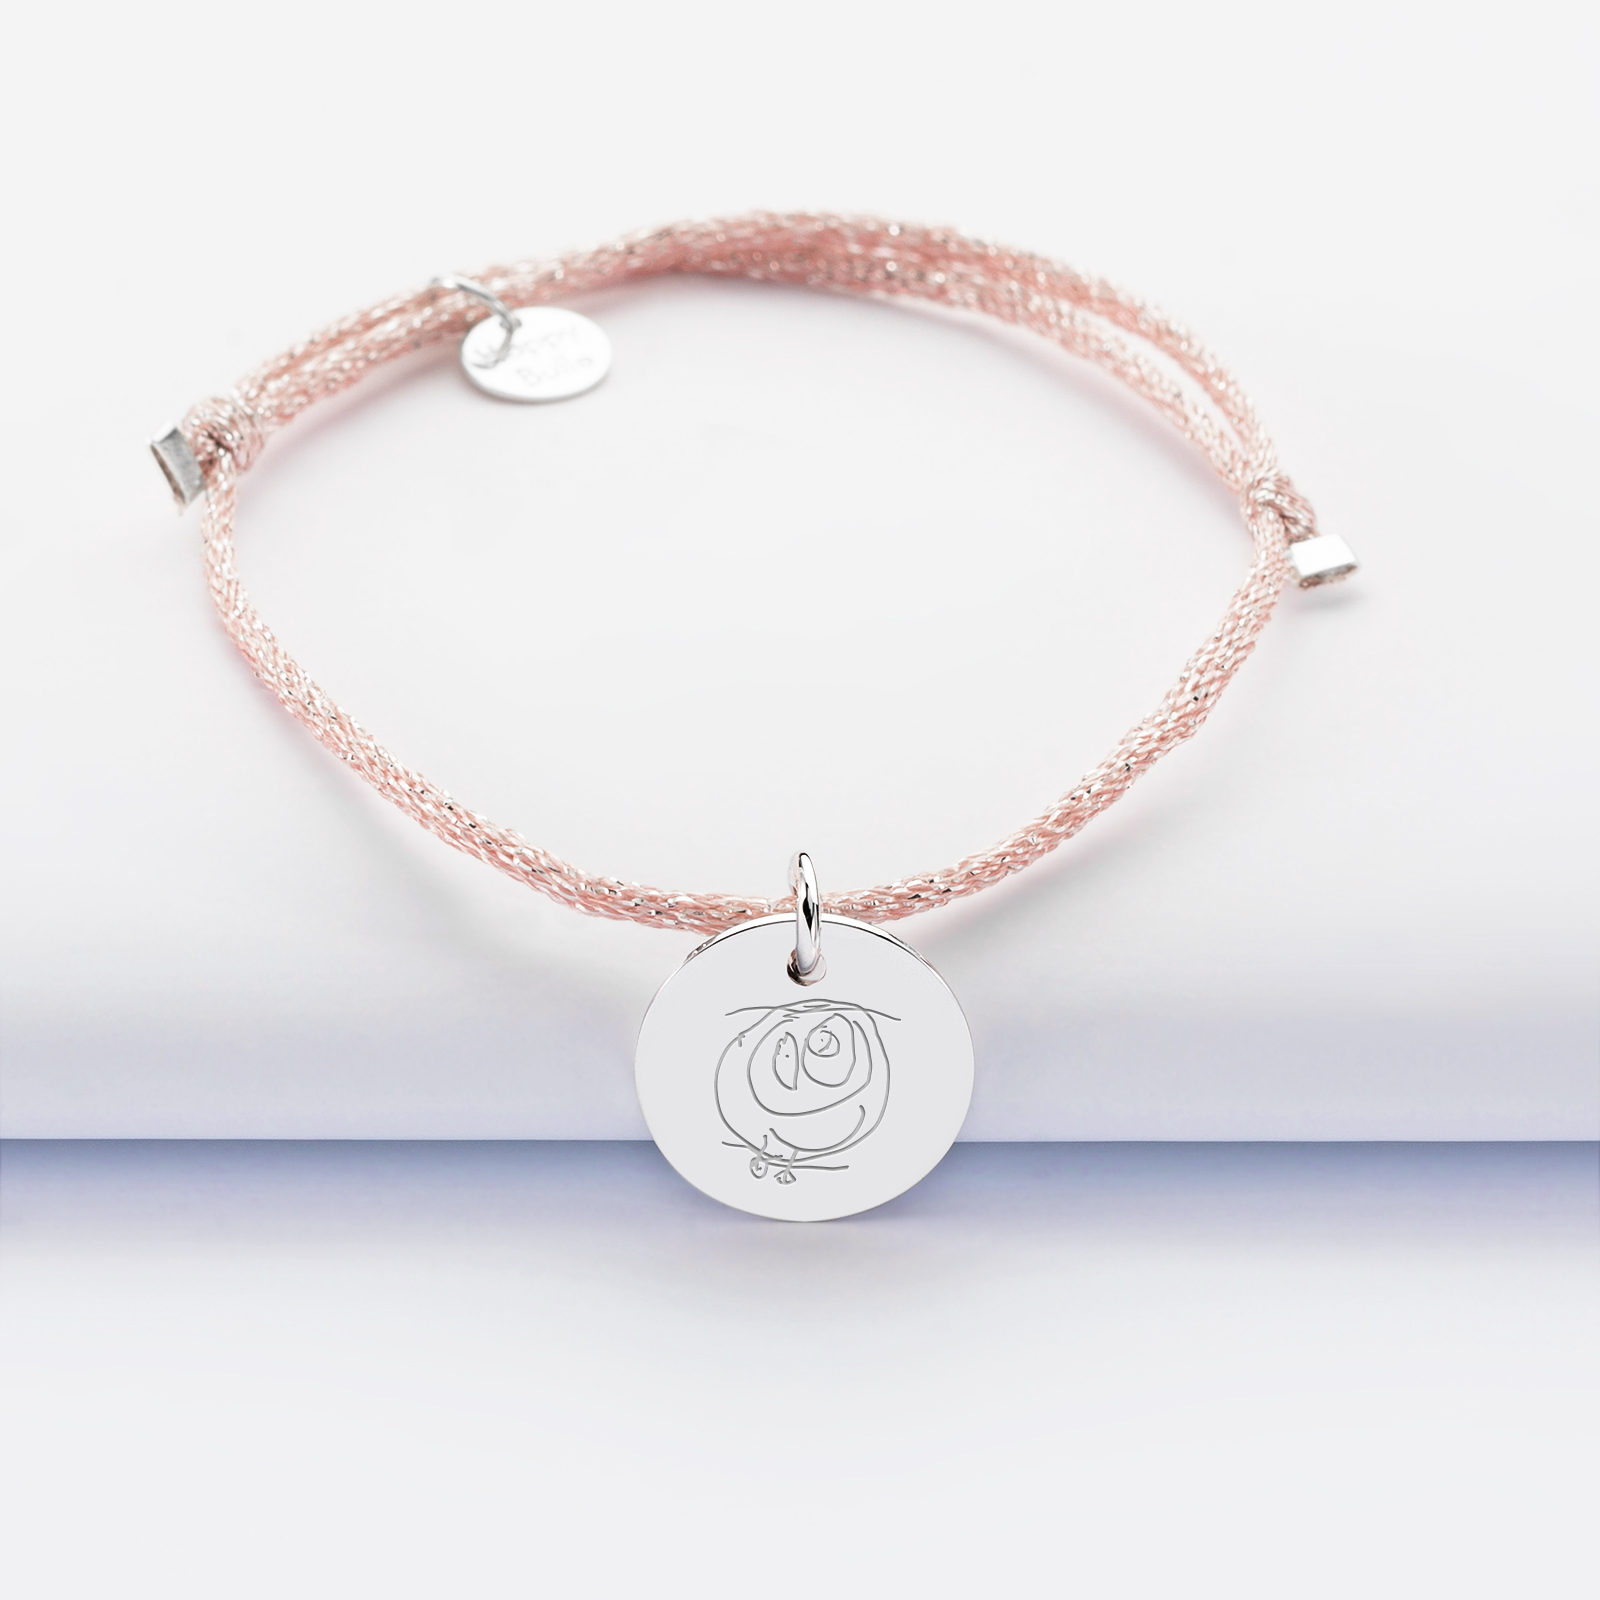 Sparkly cord bracelet with personalised engraved silver medallion 15 mm sketch